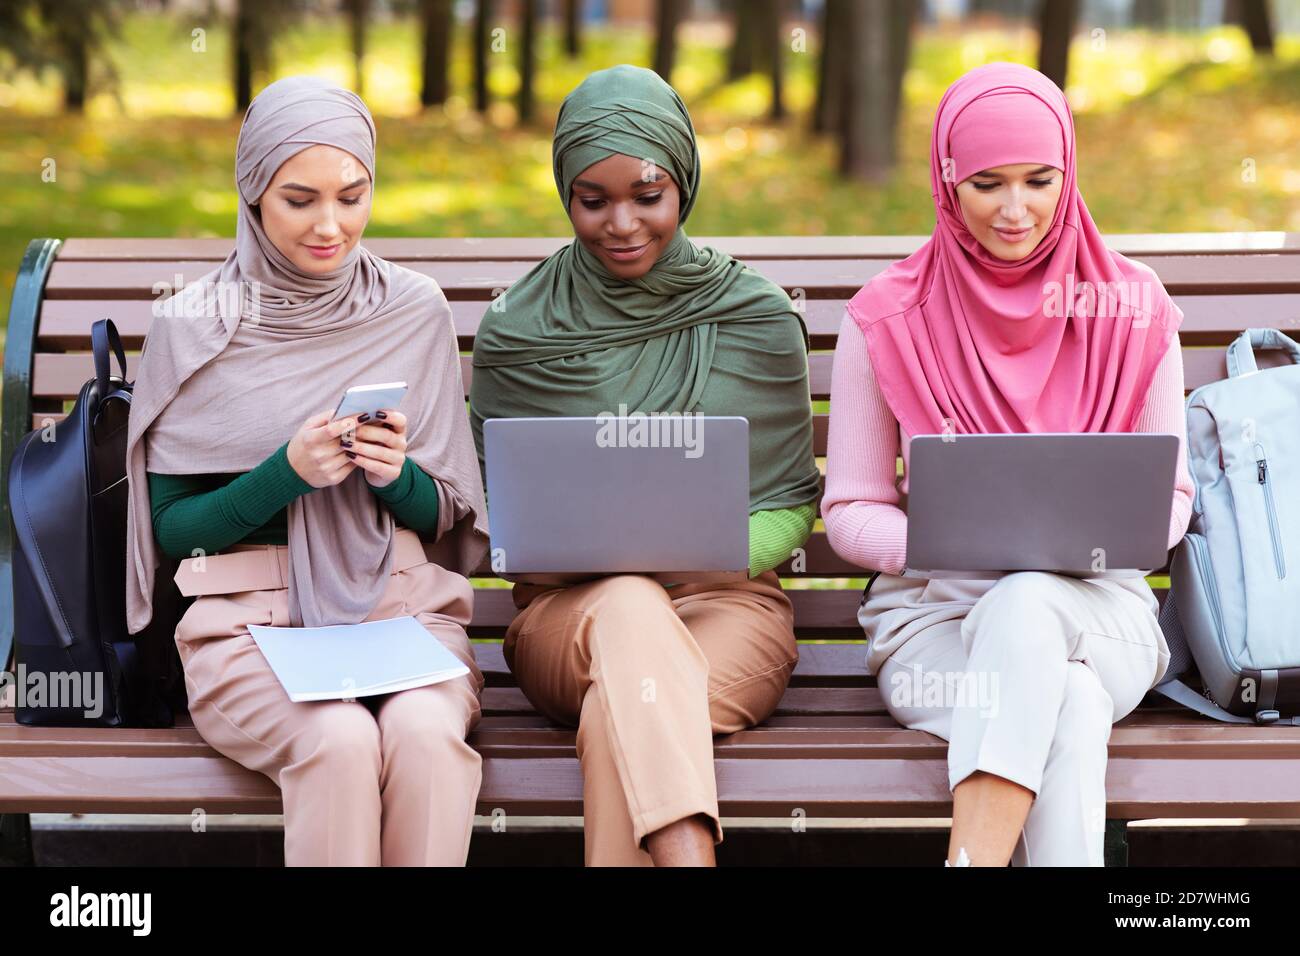 Arab Ladies Using Smartphone And Computers Learning Online In Park Stock Photo